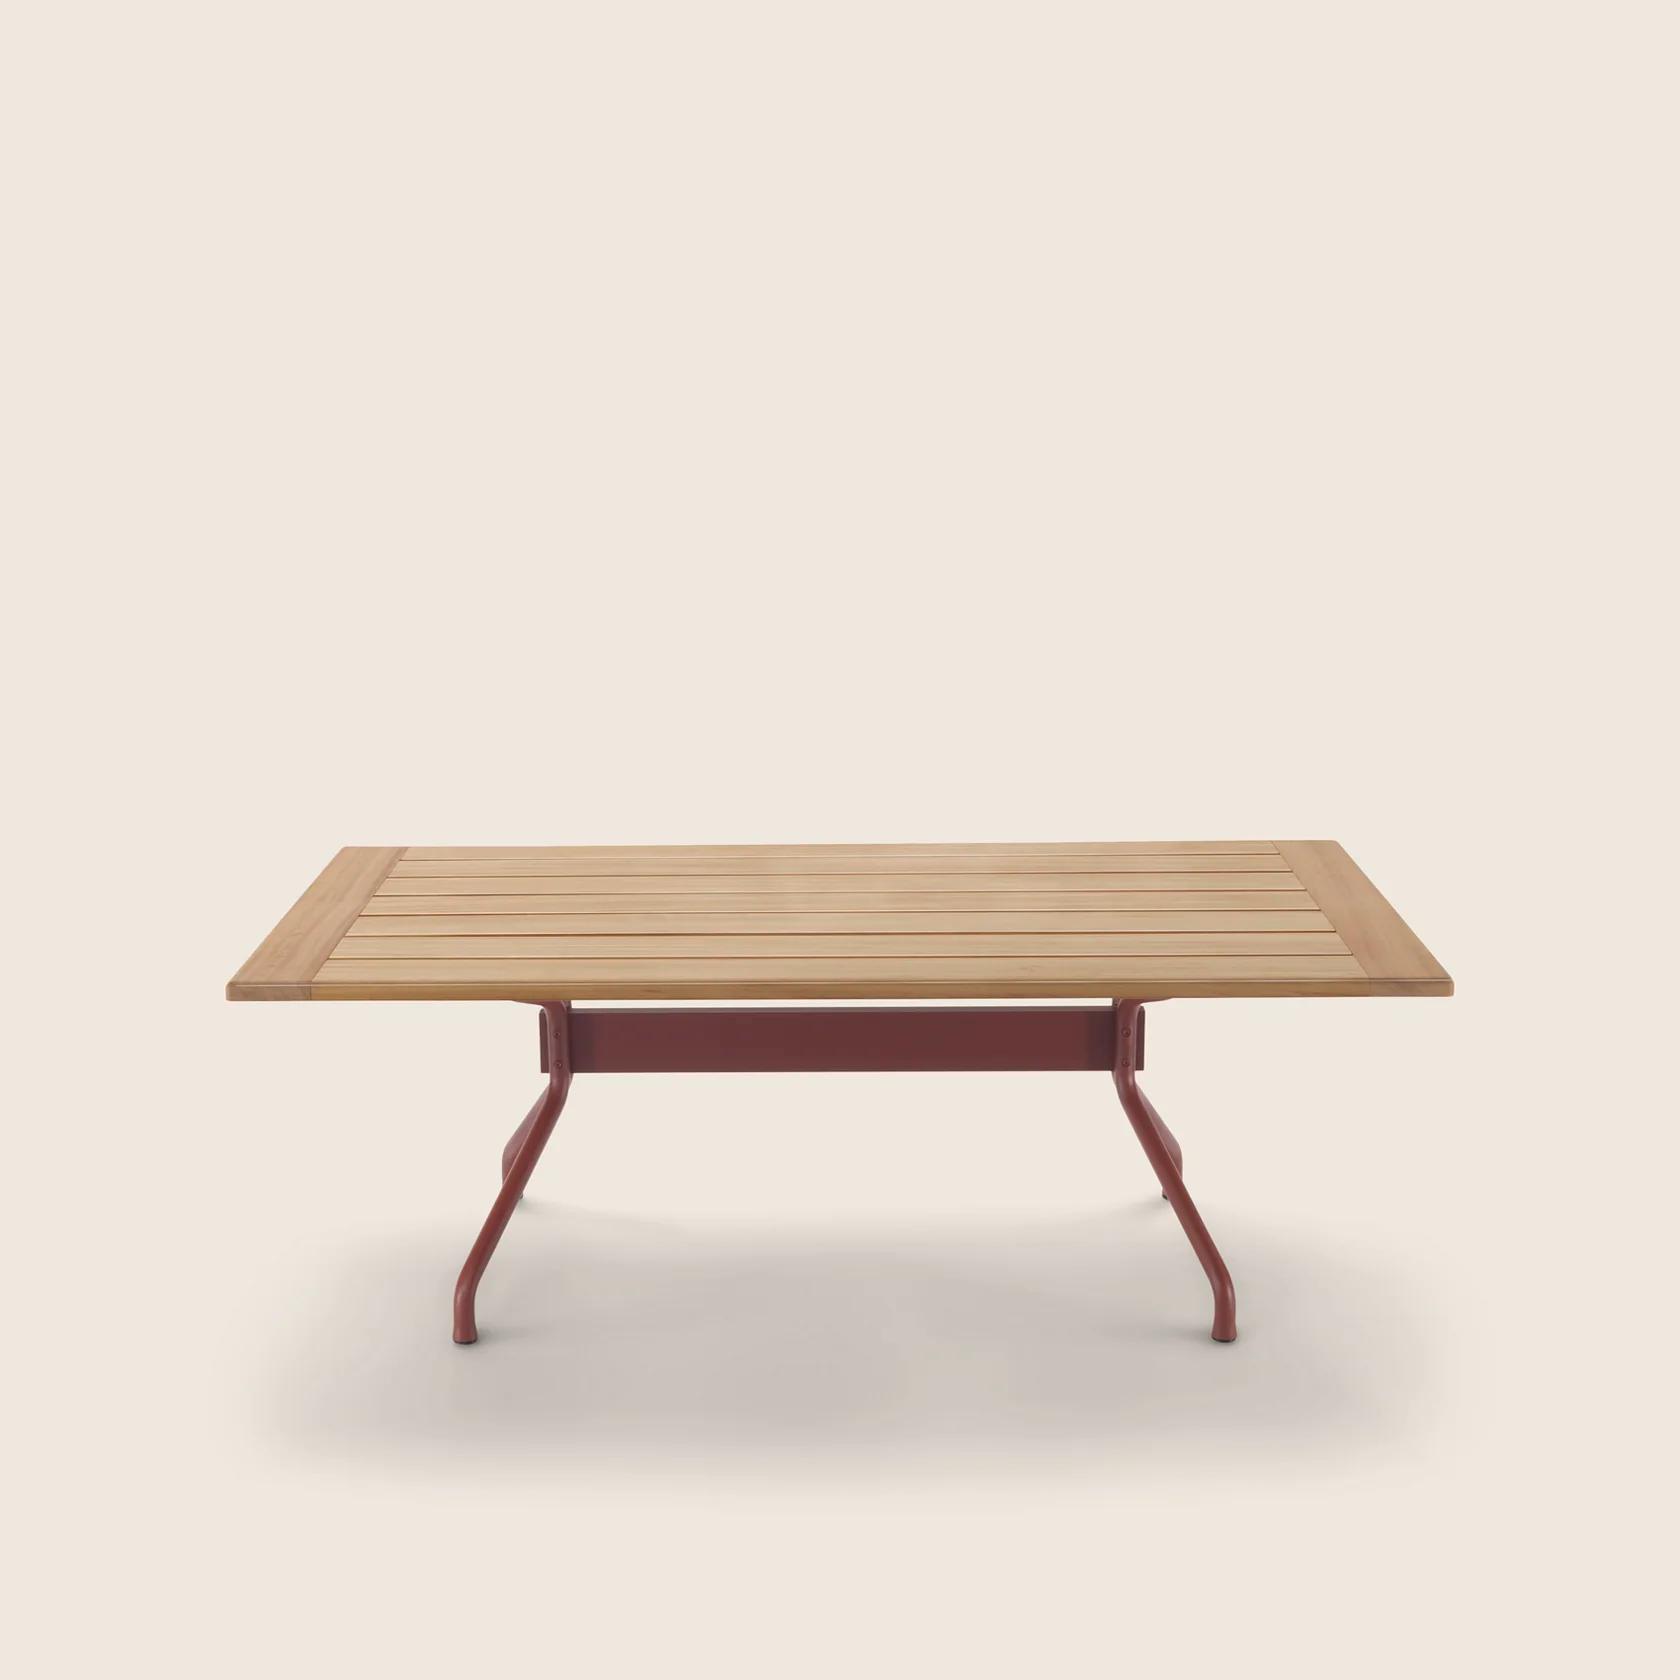 02A1L0_ACADEMY OUTDOOR_TABLE_02.png